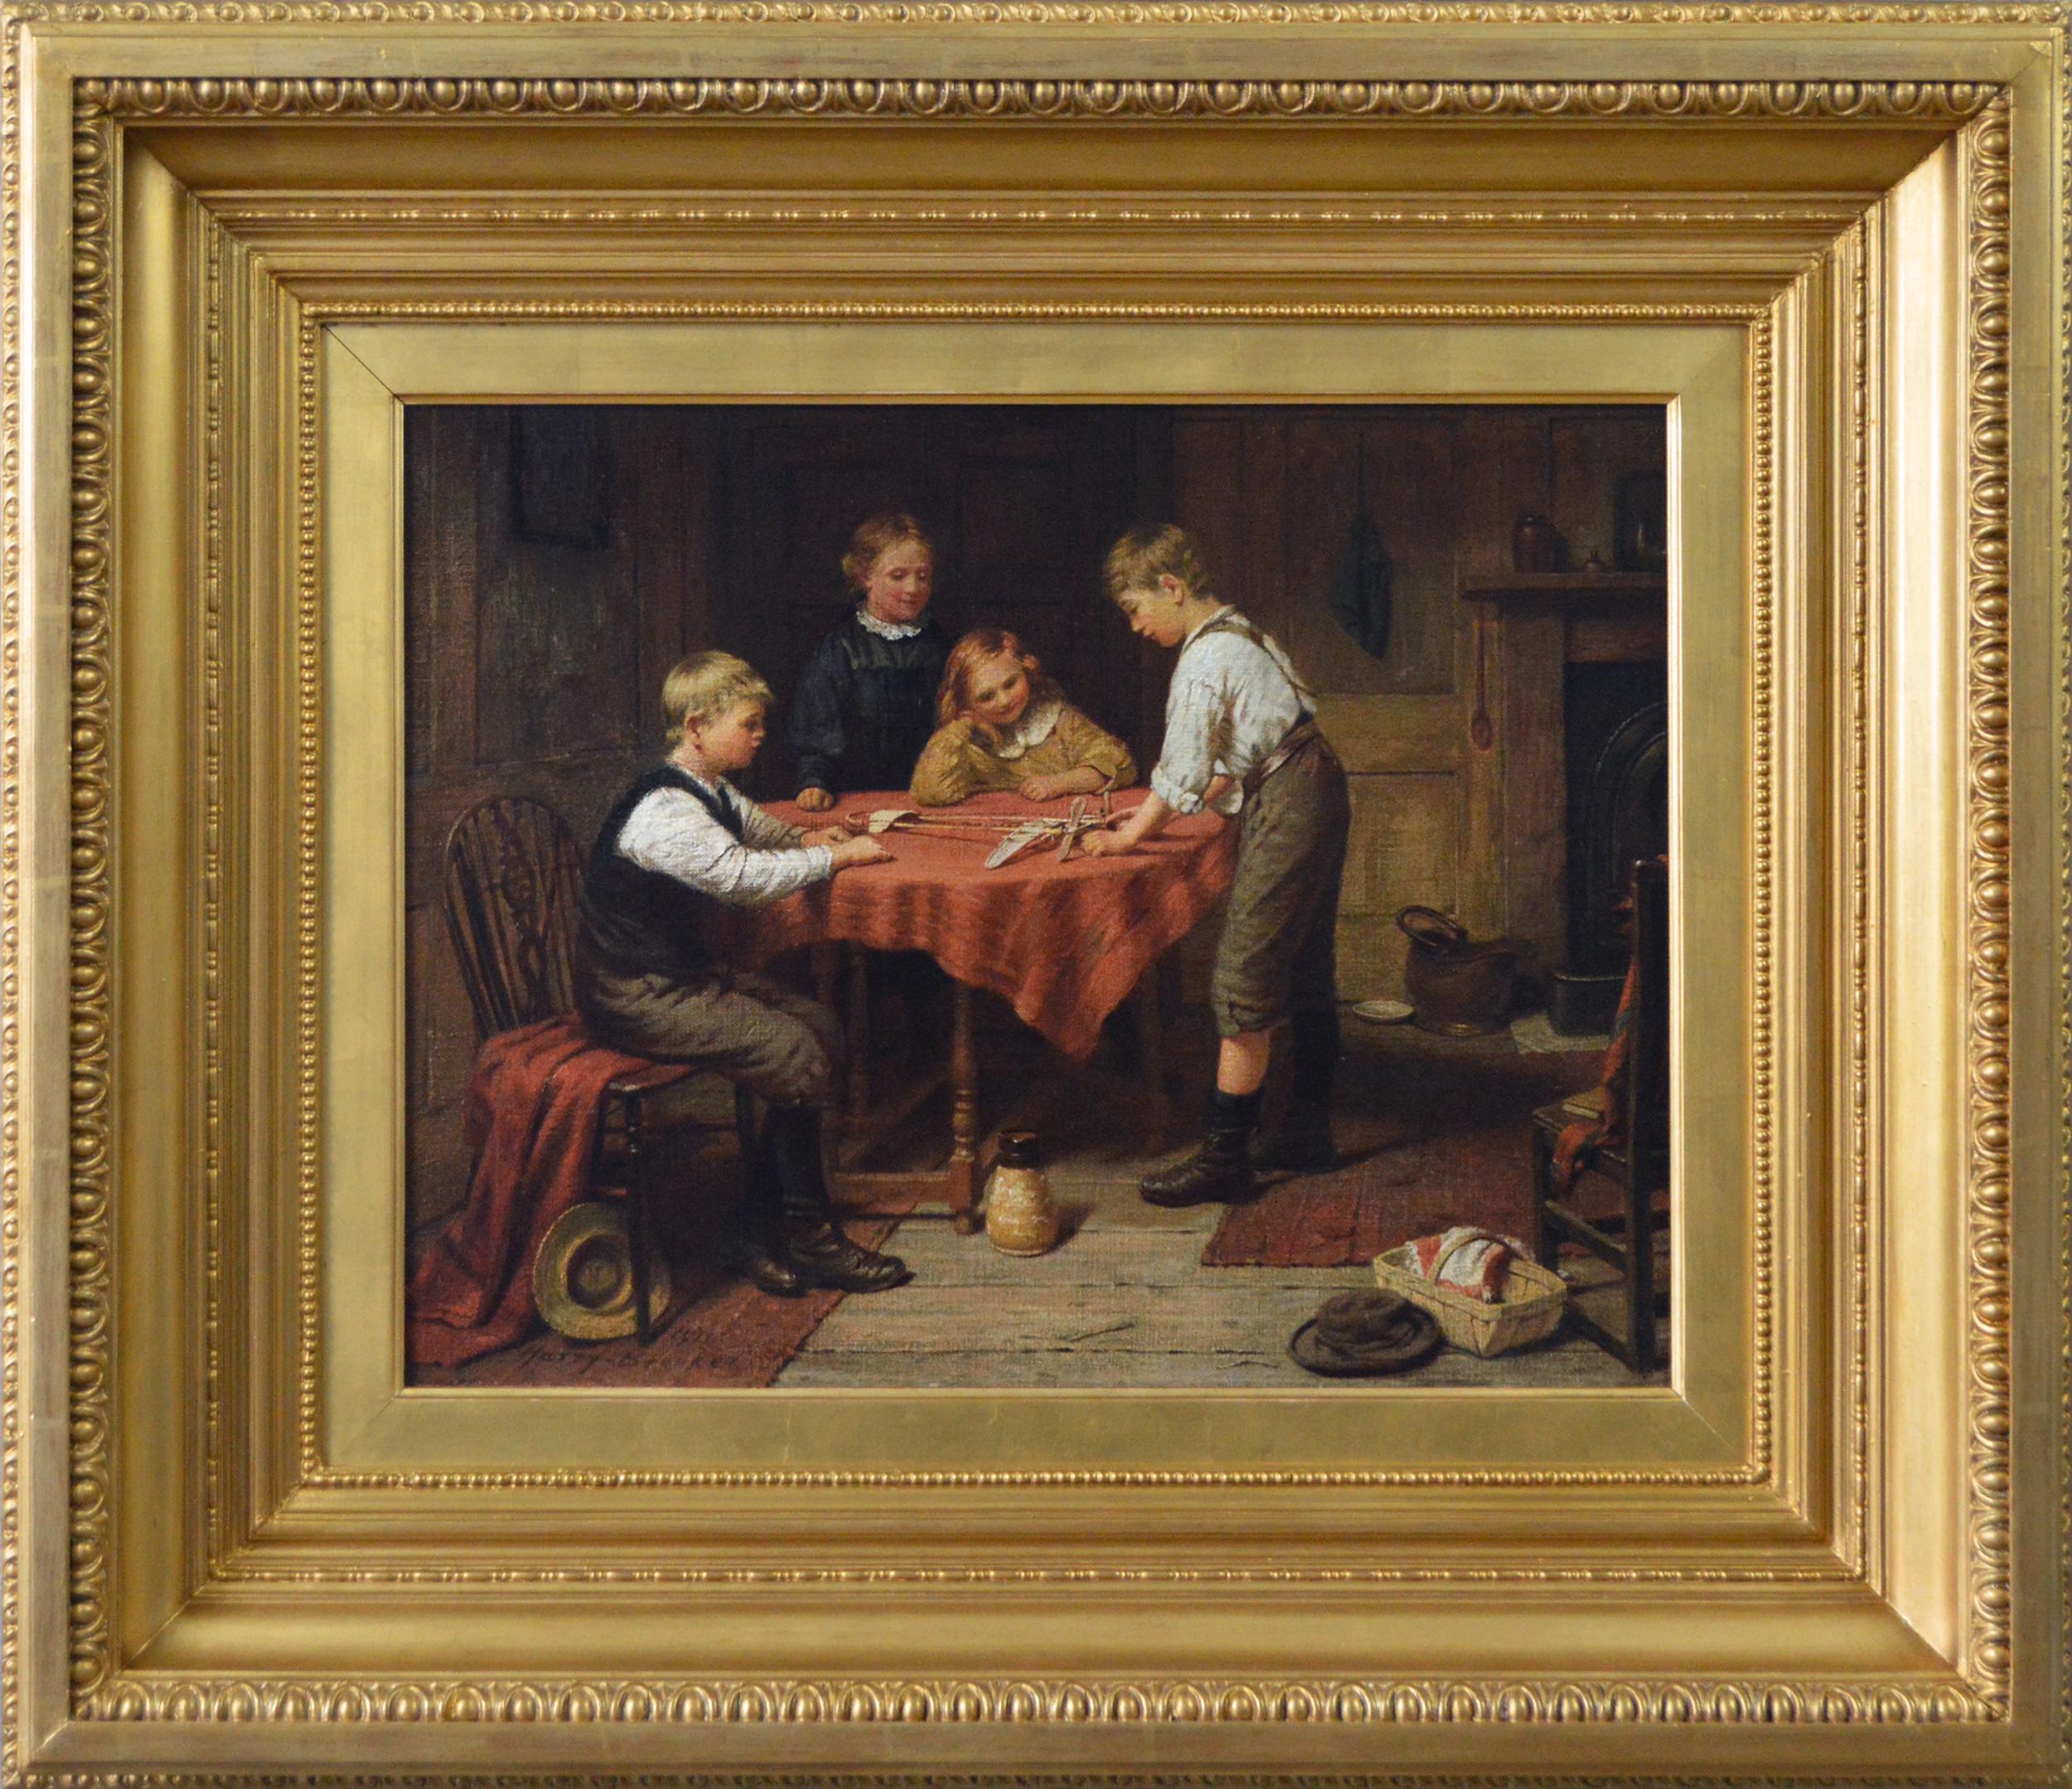 Harry Brooker Interior Painting - Genre oil painting of children with a model aeroplane